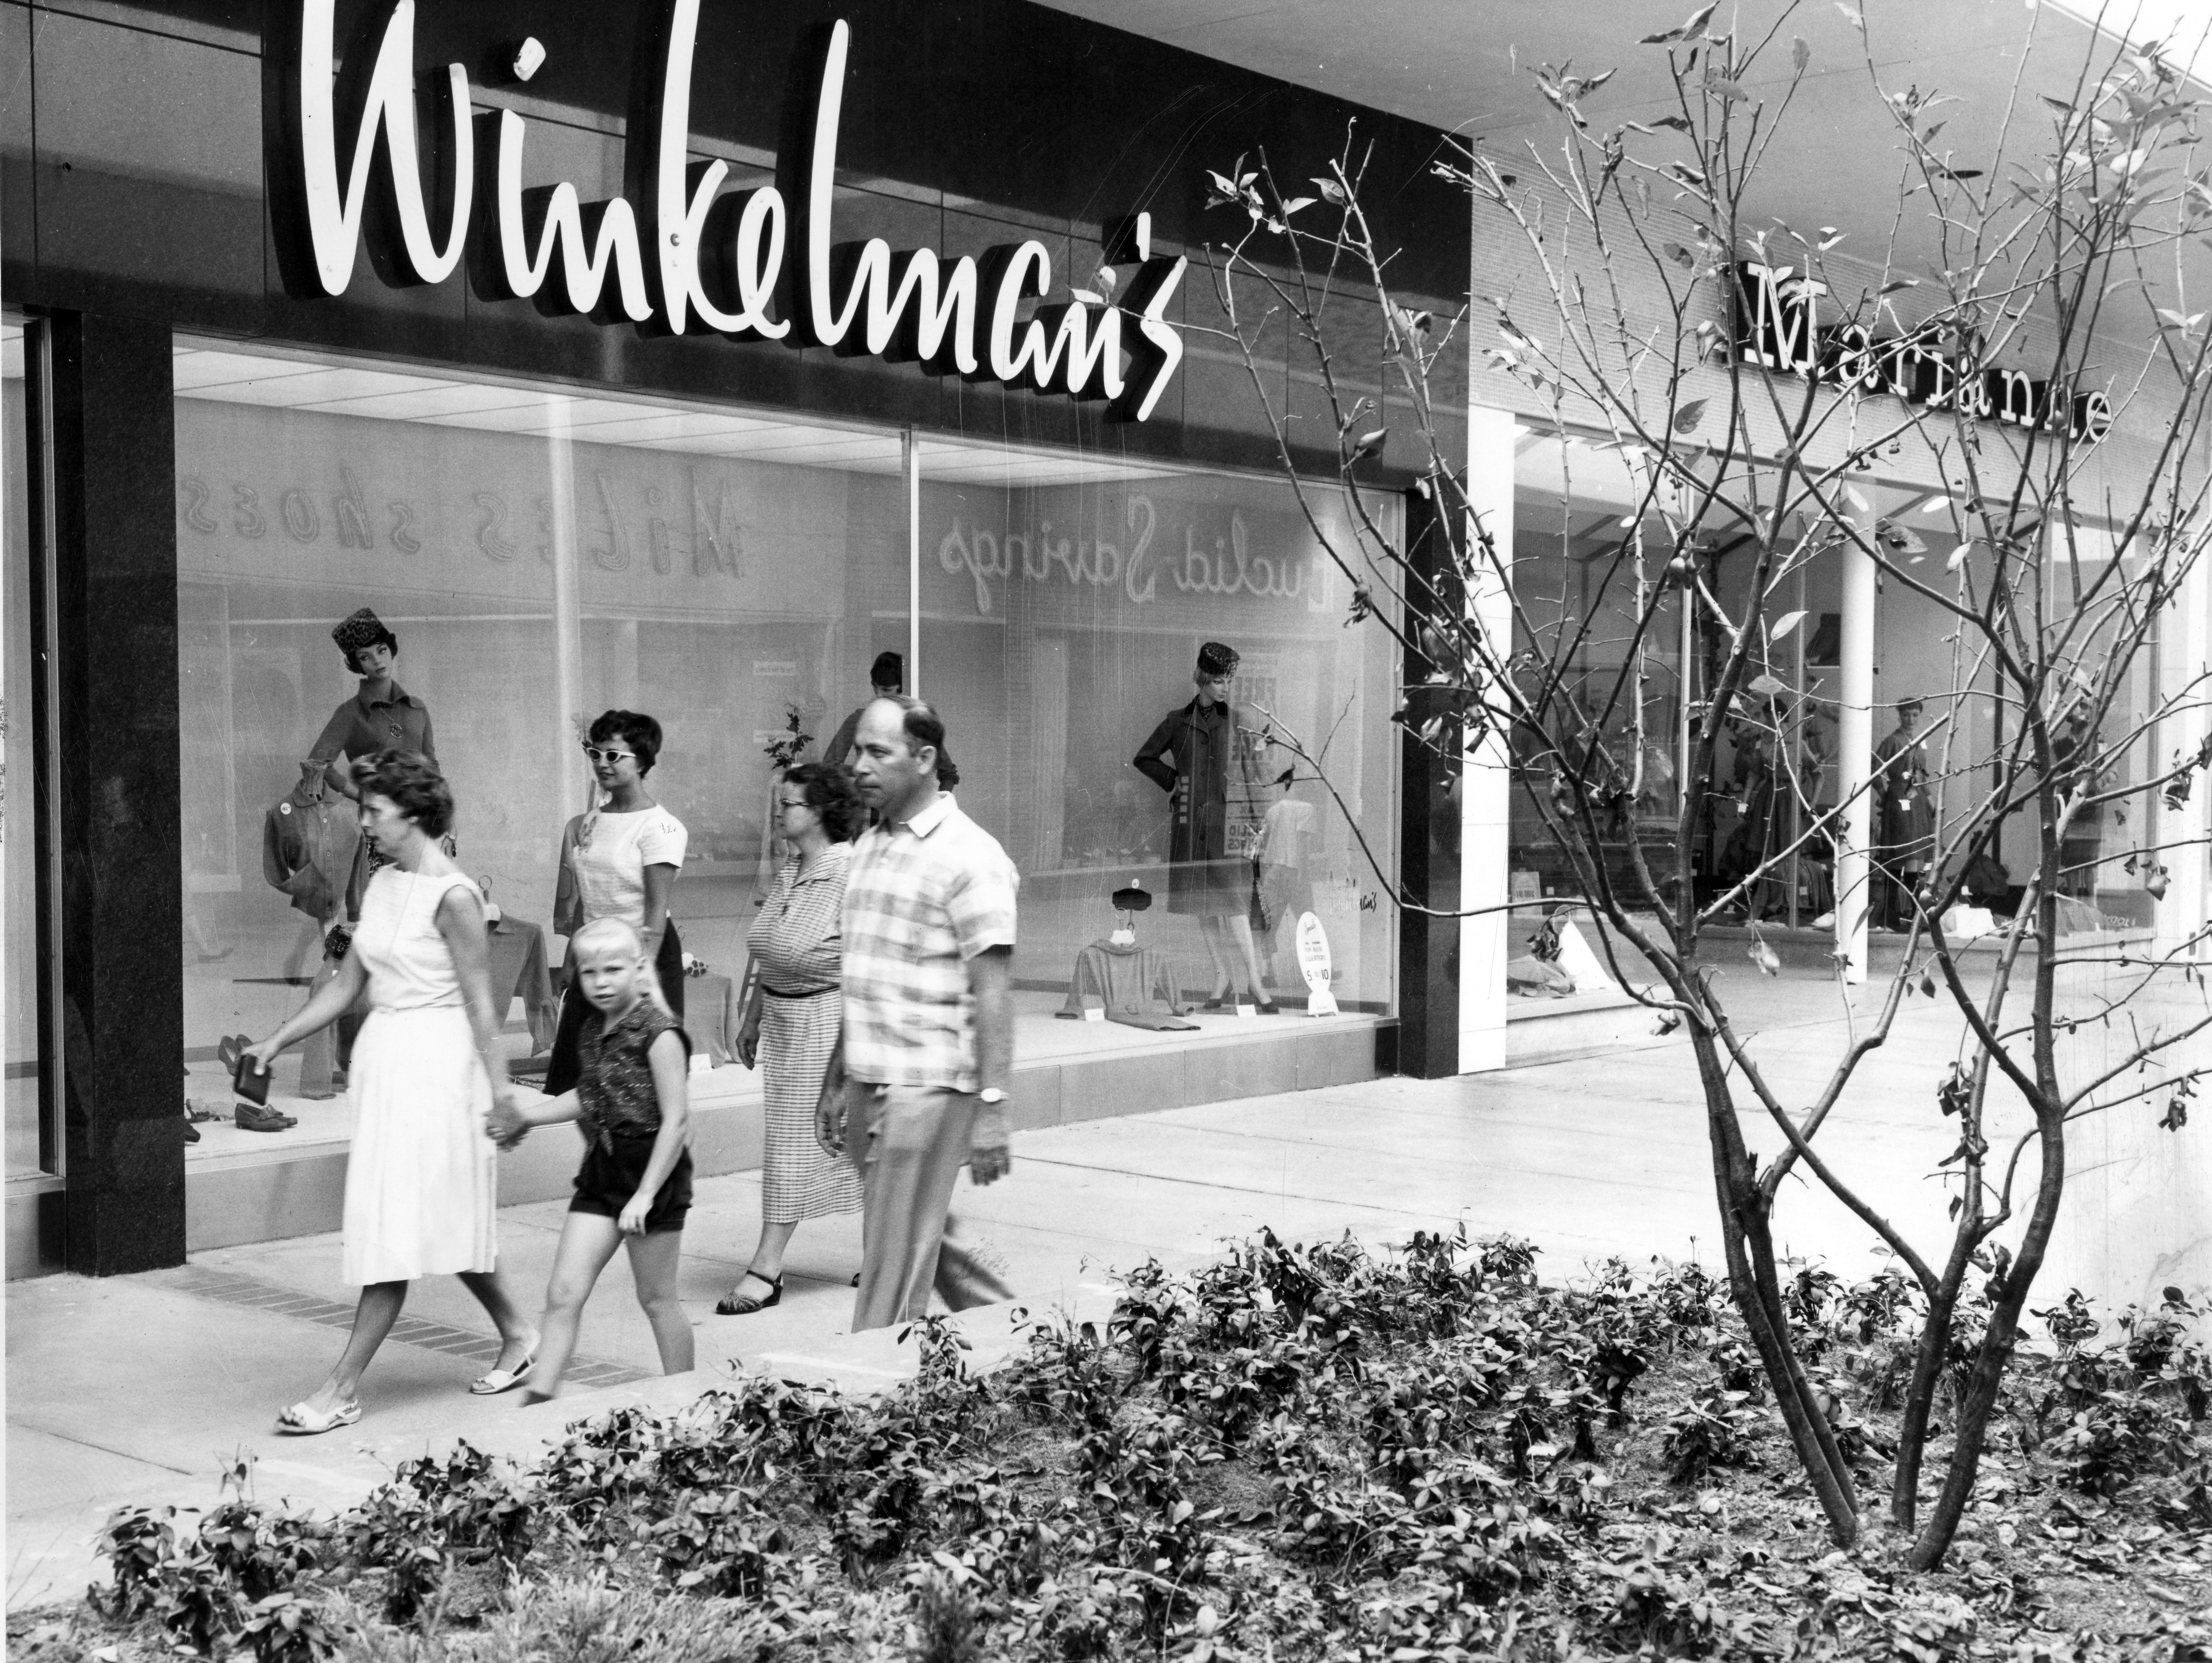 Winkelman's Department Store in the Parmatown Shopping Center in Parma, OH.